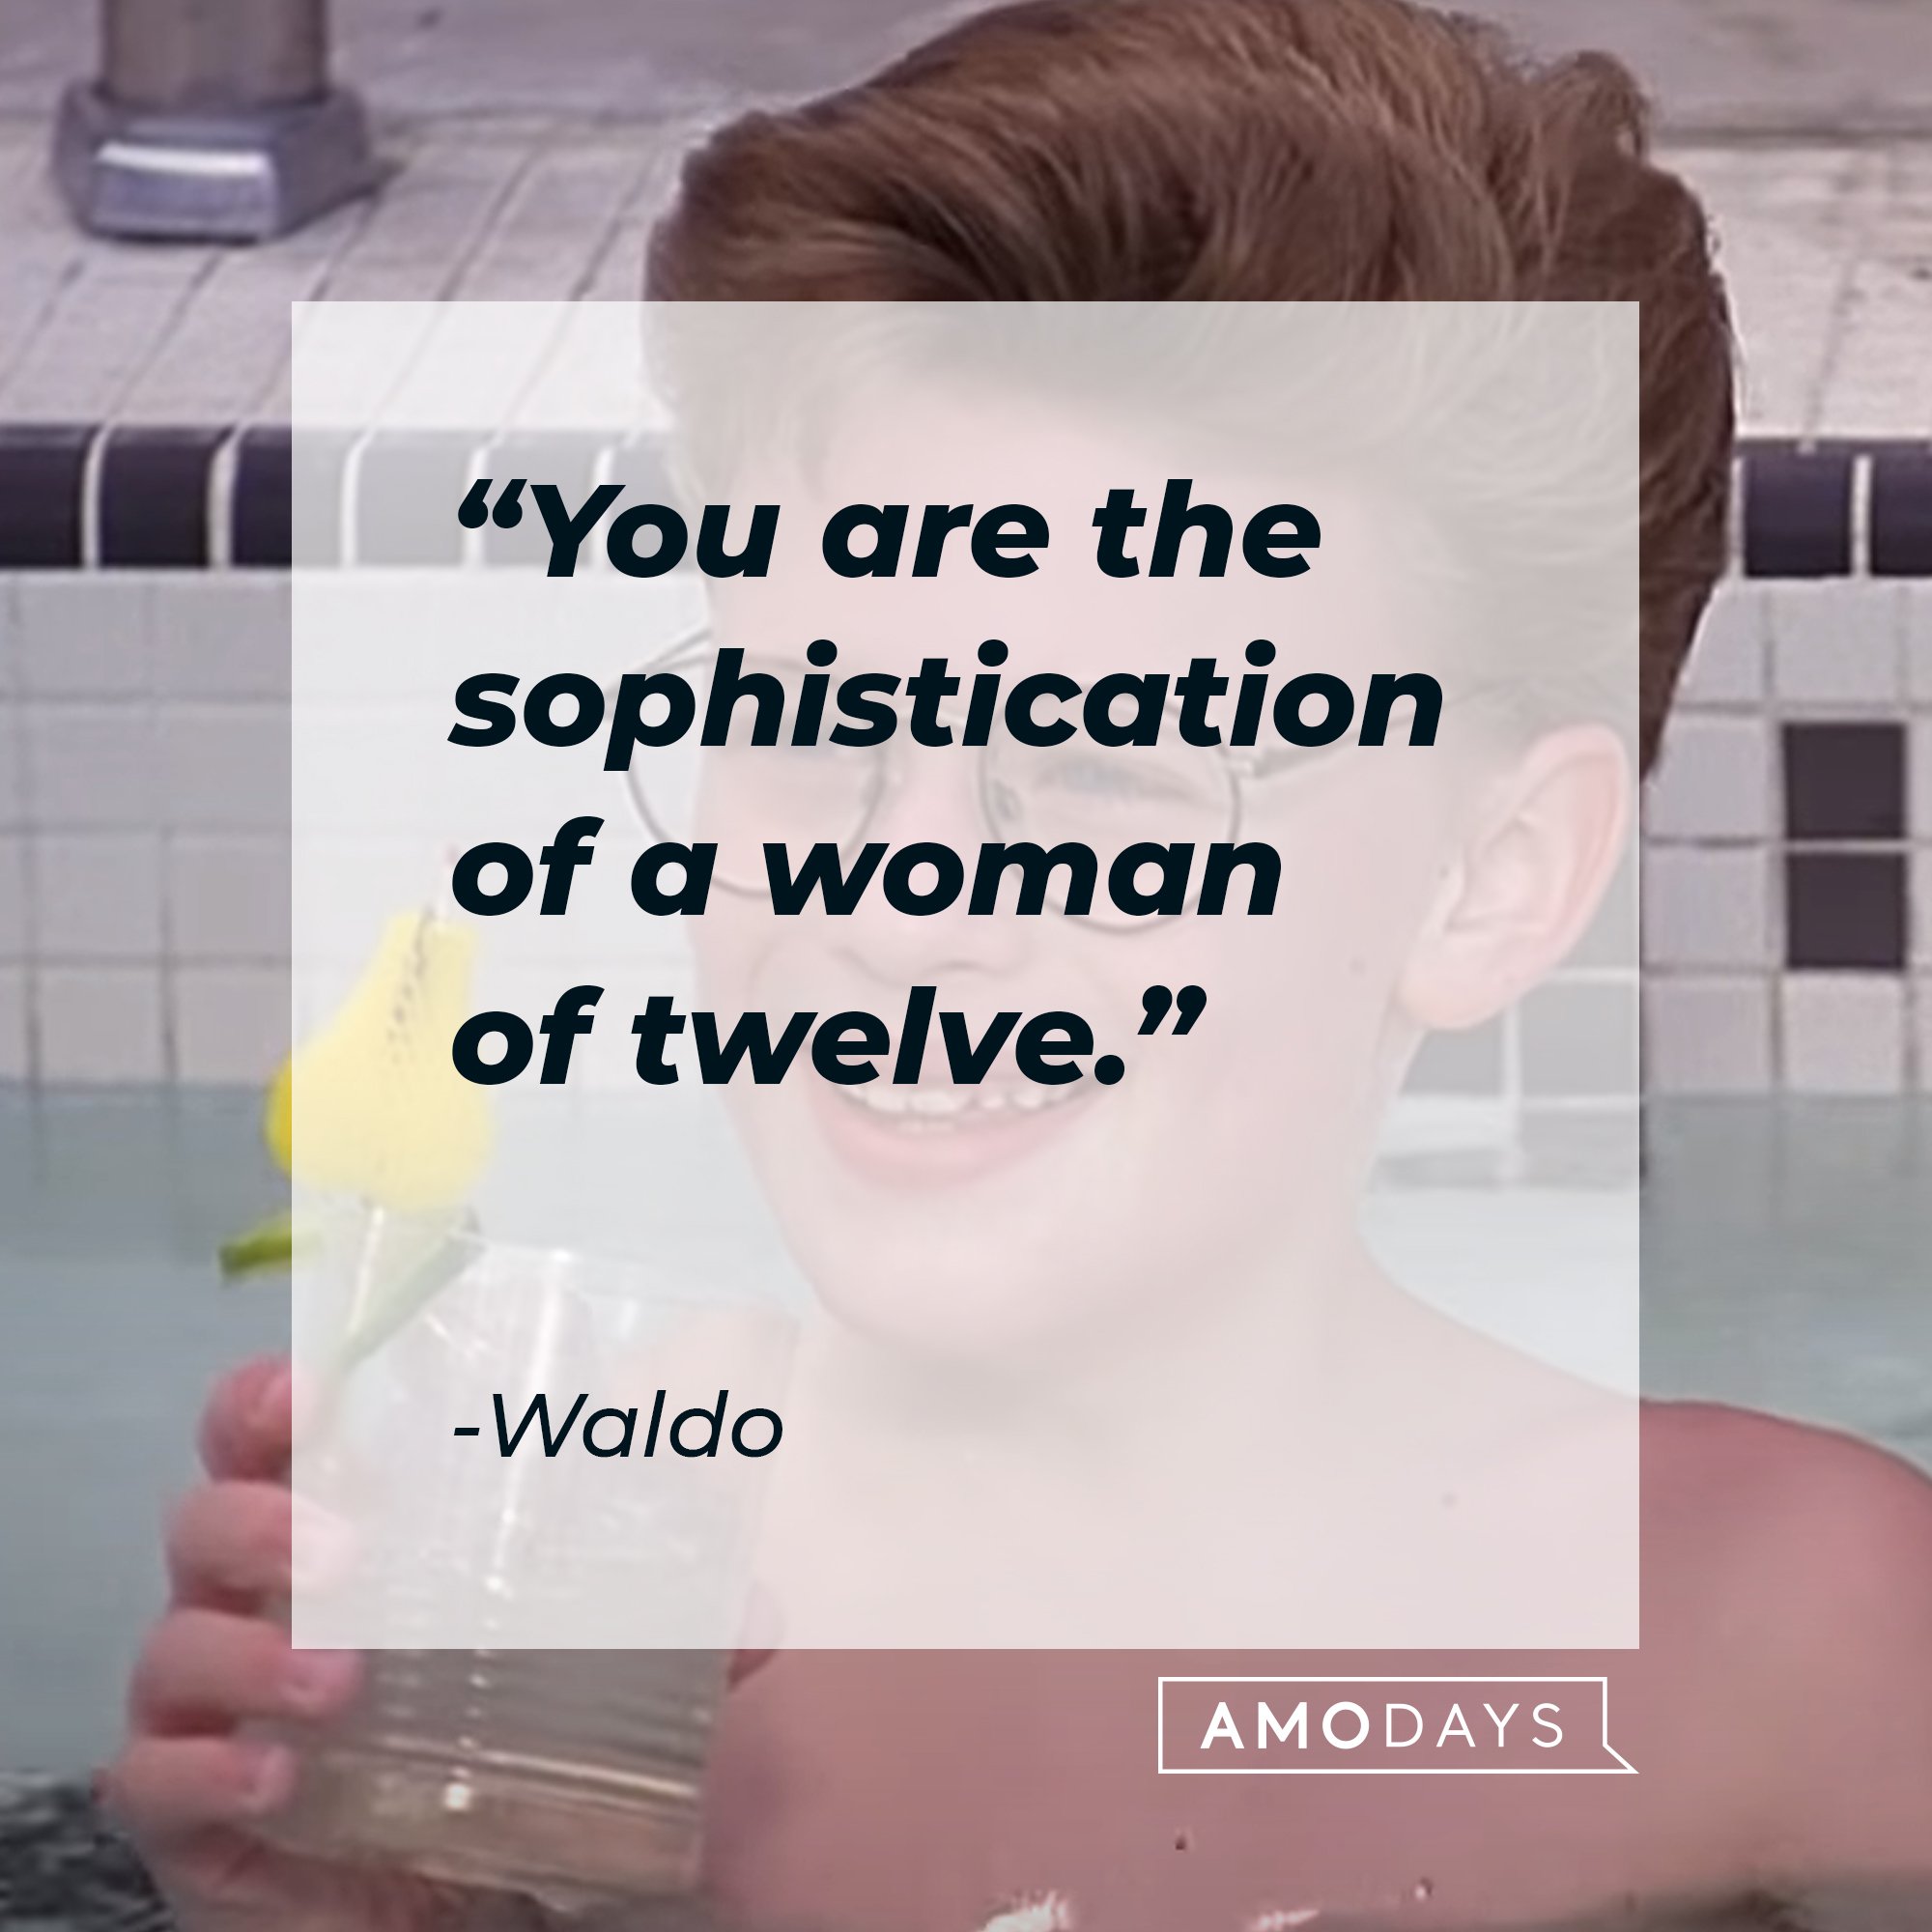 Waldo’s quote: "You are the sophistication of a woman of twelve." | Image: AmoDays